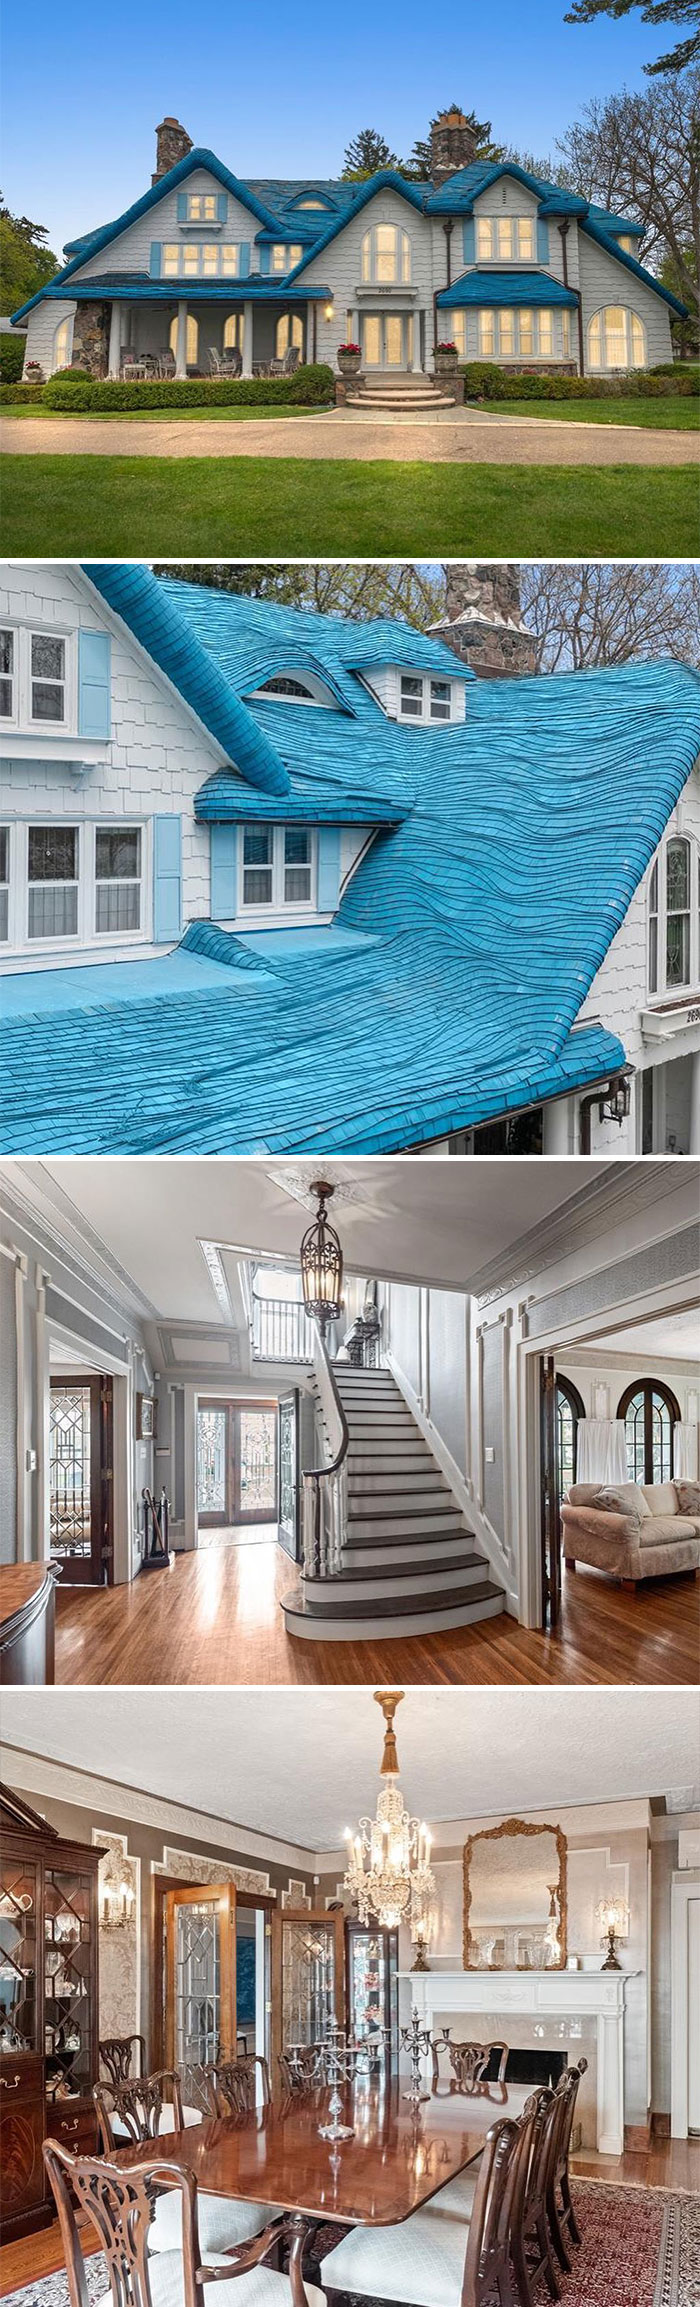 If Your Home Doesn’t Have A Smurf Roof Then Don’t Even Think About Inviting Me Over. Currently Listed At $4,199,000 In West Bloomfield, Mi